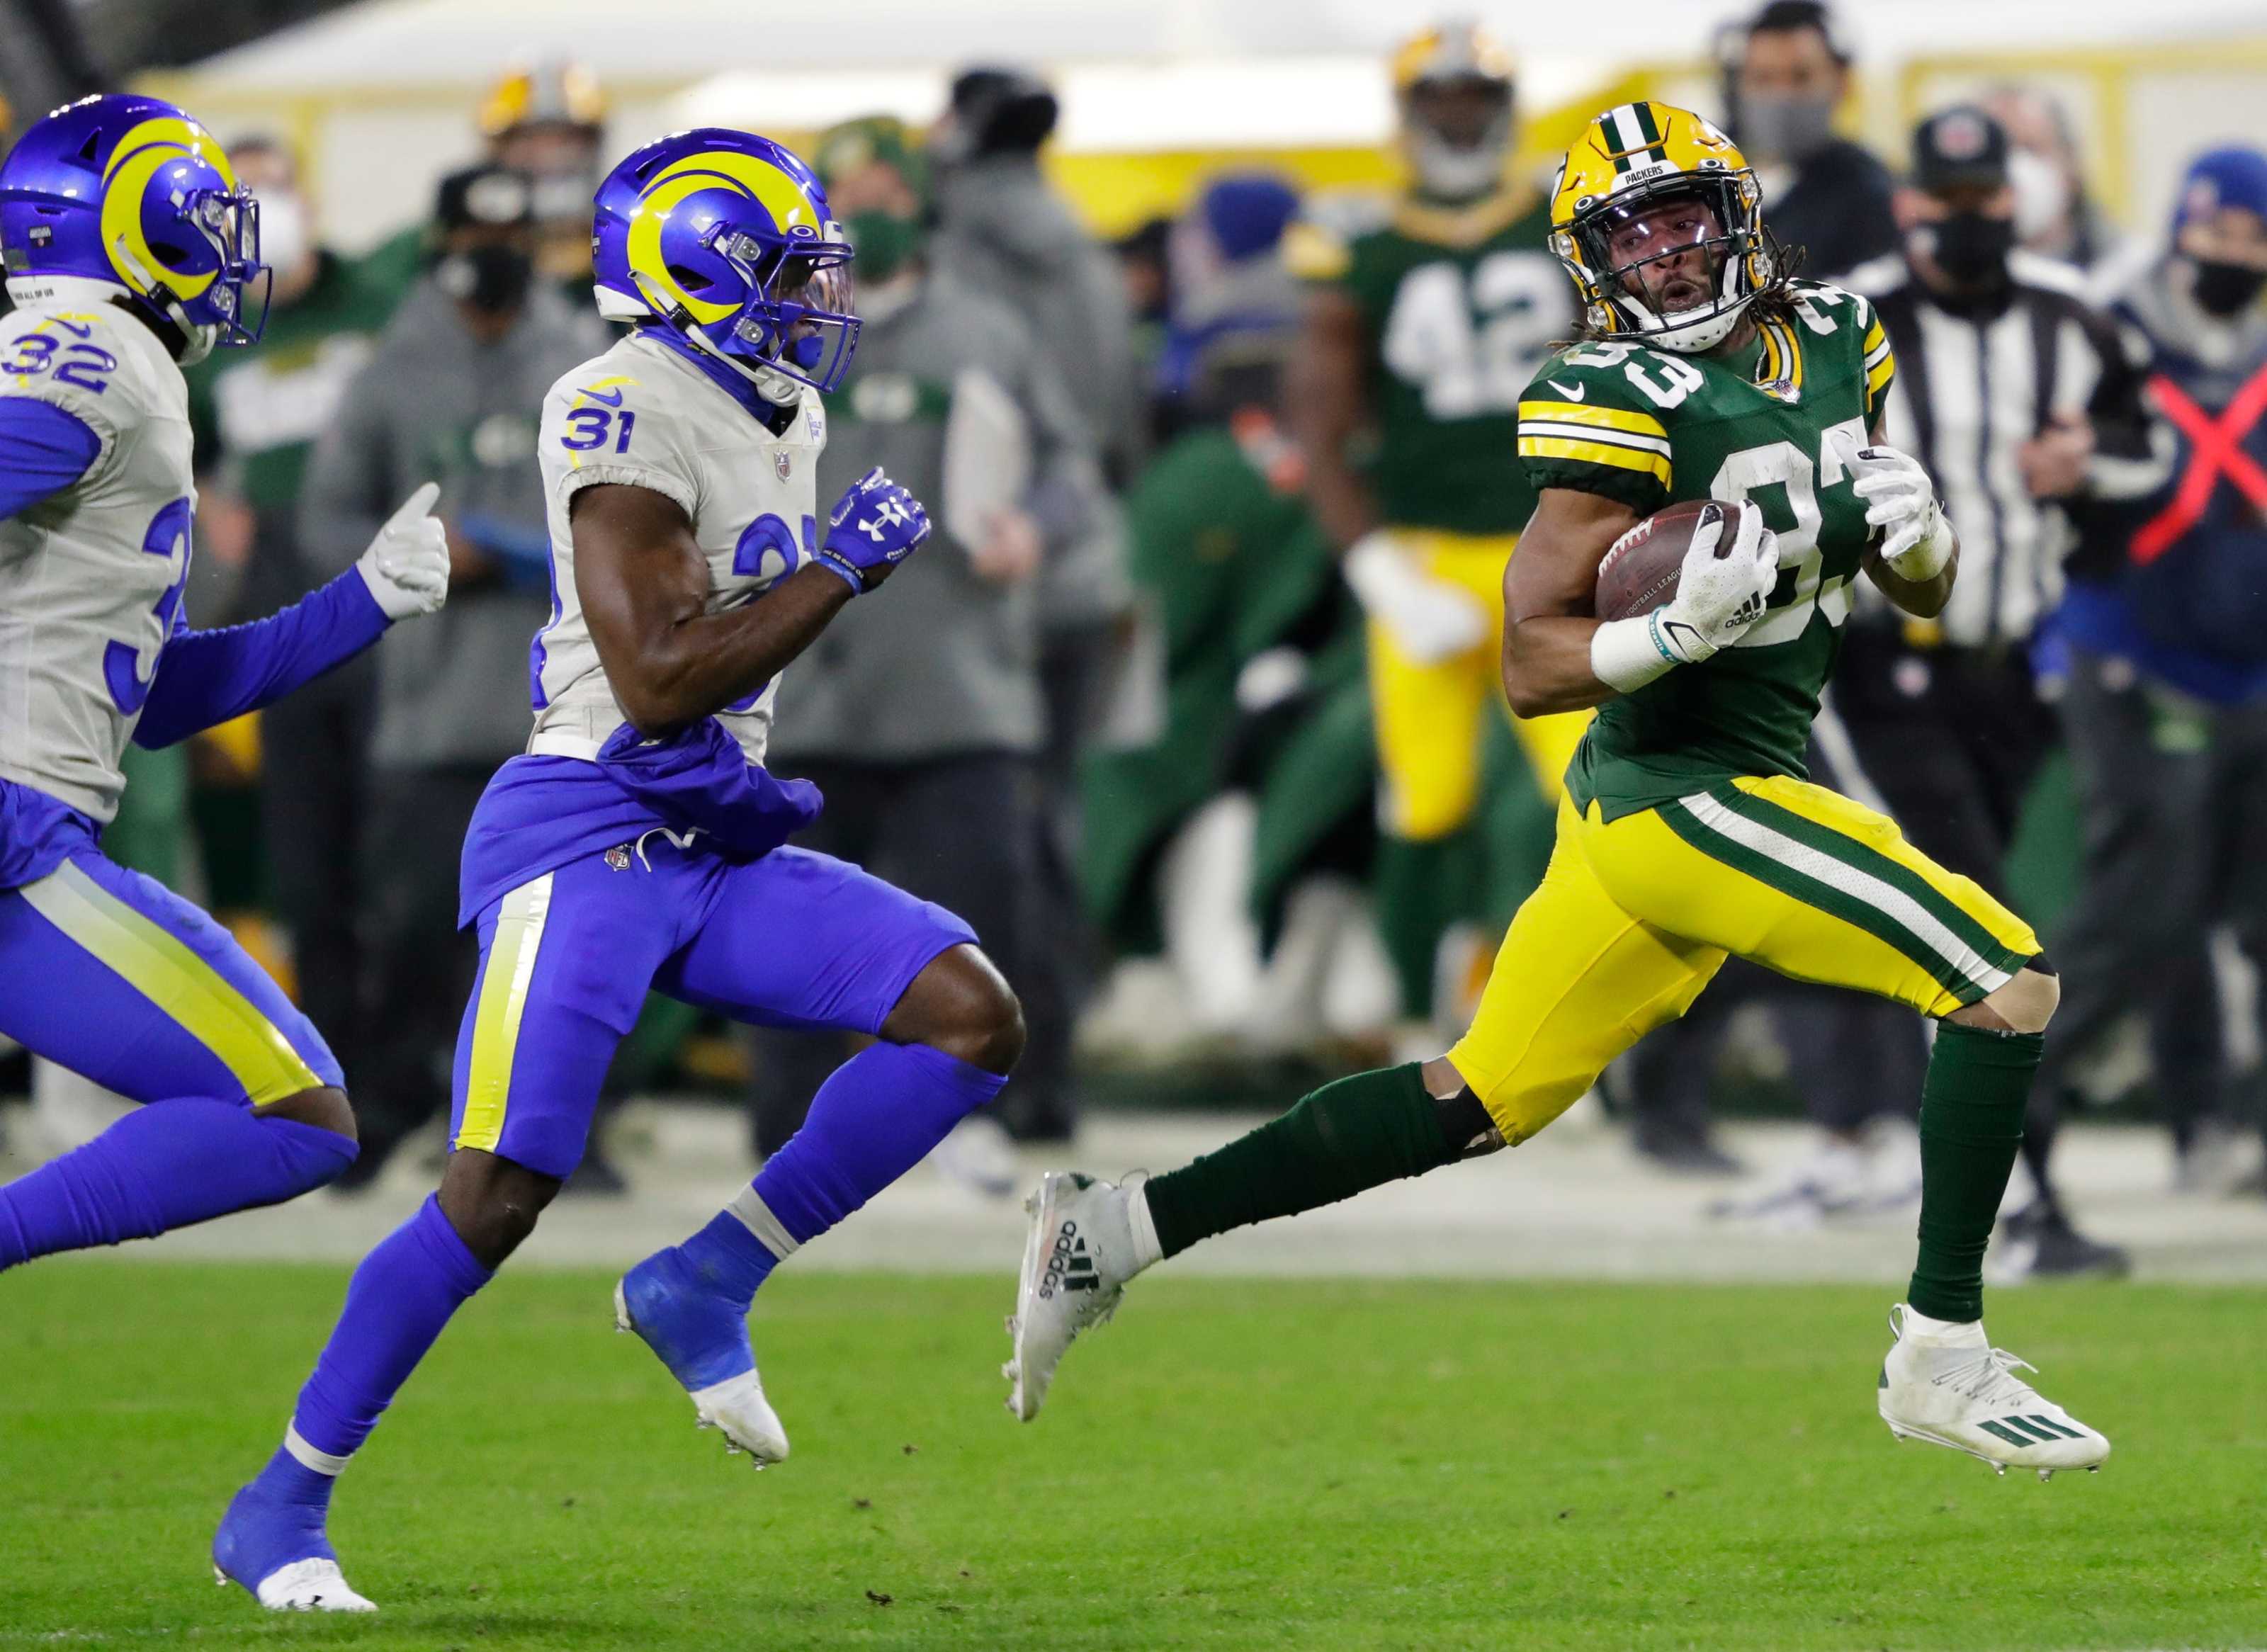 Aaron Jones Injury Update: Are the Packers Playing It Safe With Jones?